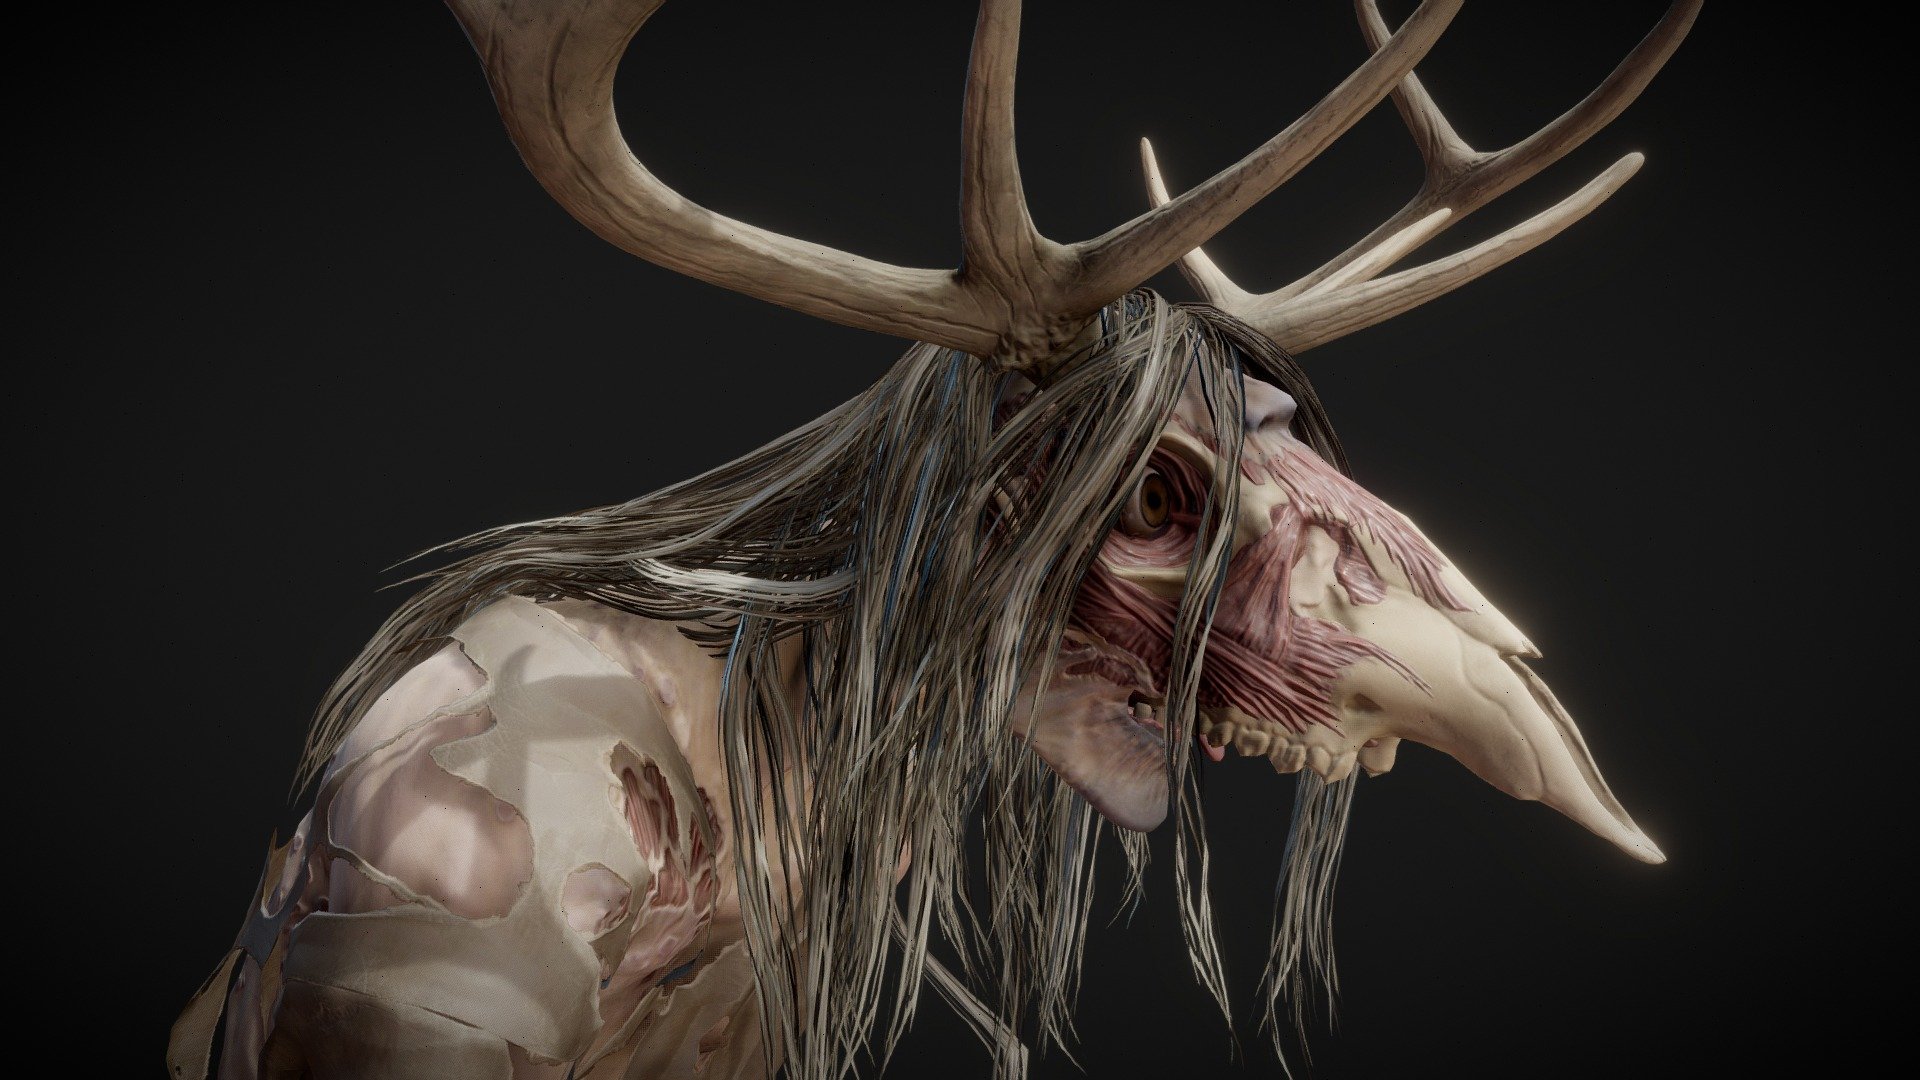 Fully rigged, low-poly &amp; game-ready Wendigo model for animation projects, games and prototypes.

Details:




Total triangle count: 80,853

Body: 40,773 | Clothes: 8,172 | Eyes: 2,724 | Hair: 29,184 tris.

2 Materials (Opaque &amp; Masked)

2k PBR textures (6 UDIMs, ACES color space)

BaseColor, Roughness, Metallic, Height, Normal (DirectX), Opacity

Rigged with Rigify

Includes 7 sample animations - idle, walk &amp; run cycles, attack and jump (start, mid, end).

The .blend file includes the Metarig (used for generating the complex control rig), Control Rig (used for animating in Blender) and the Game Rig (used in engines)

.uasset files for Unreal Engine 5 ( skeletal mesh, physics asset, materials, textures and animations)

.ZTL file for Zbrush
 - Stylized Wendigo 3D Model (rigged & animated) - Buy Royalty Free 3D model by RaduCarstean 3d model